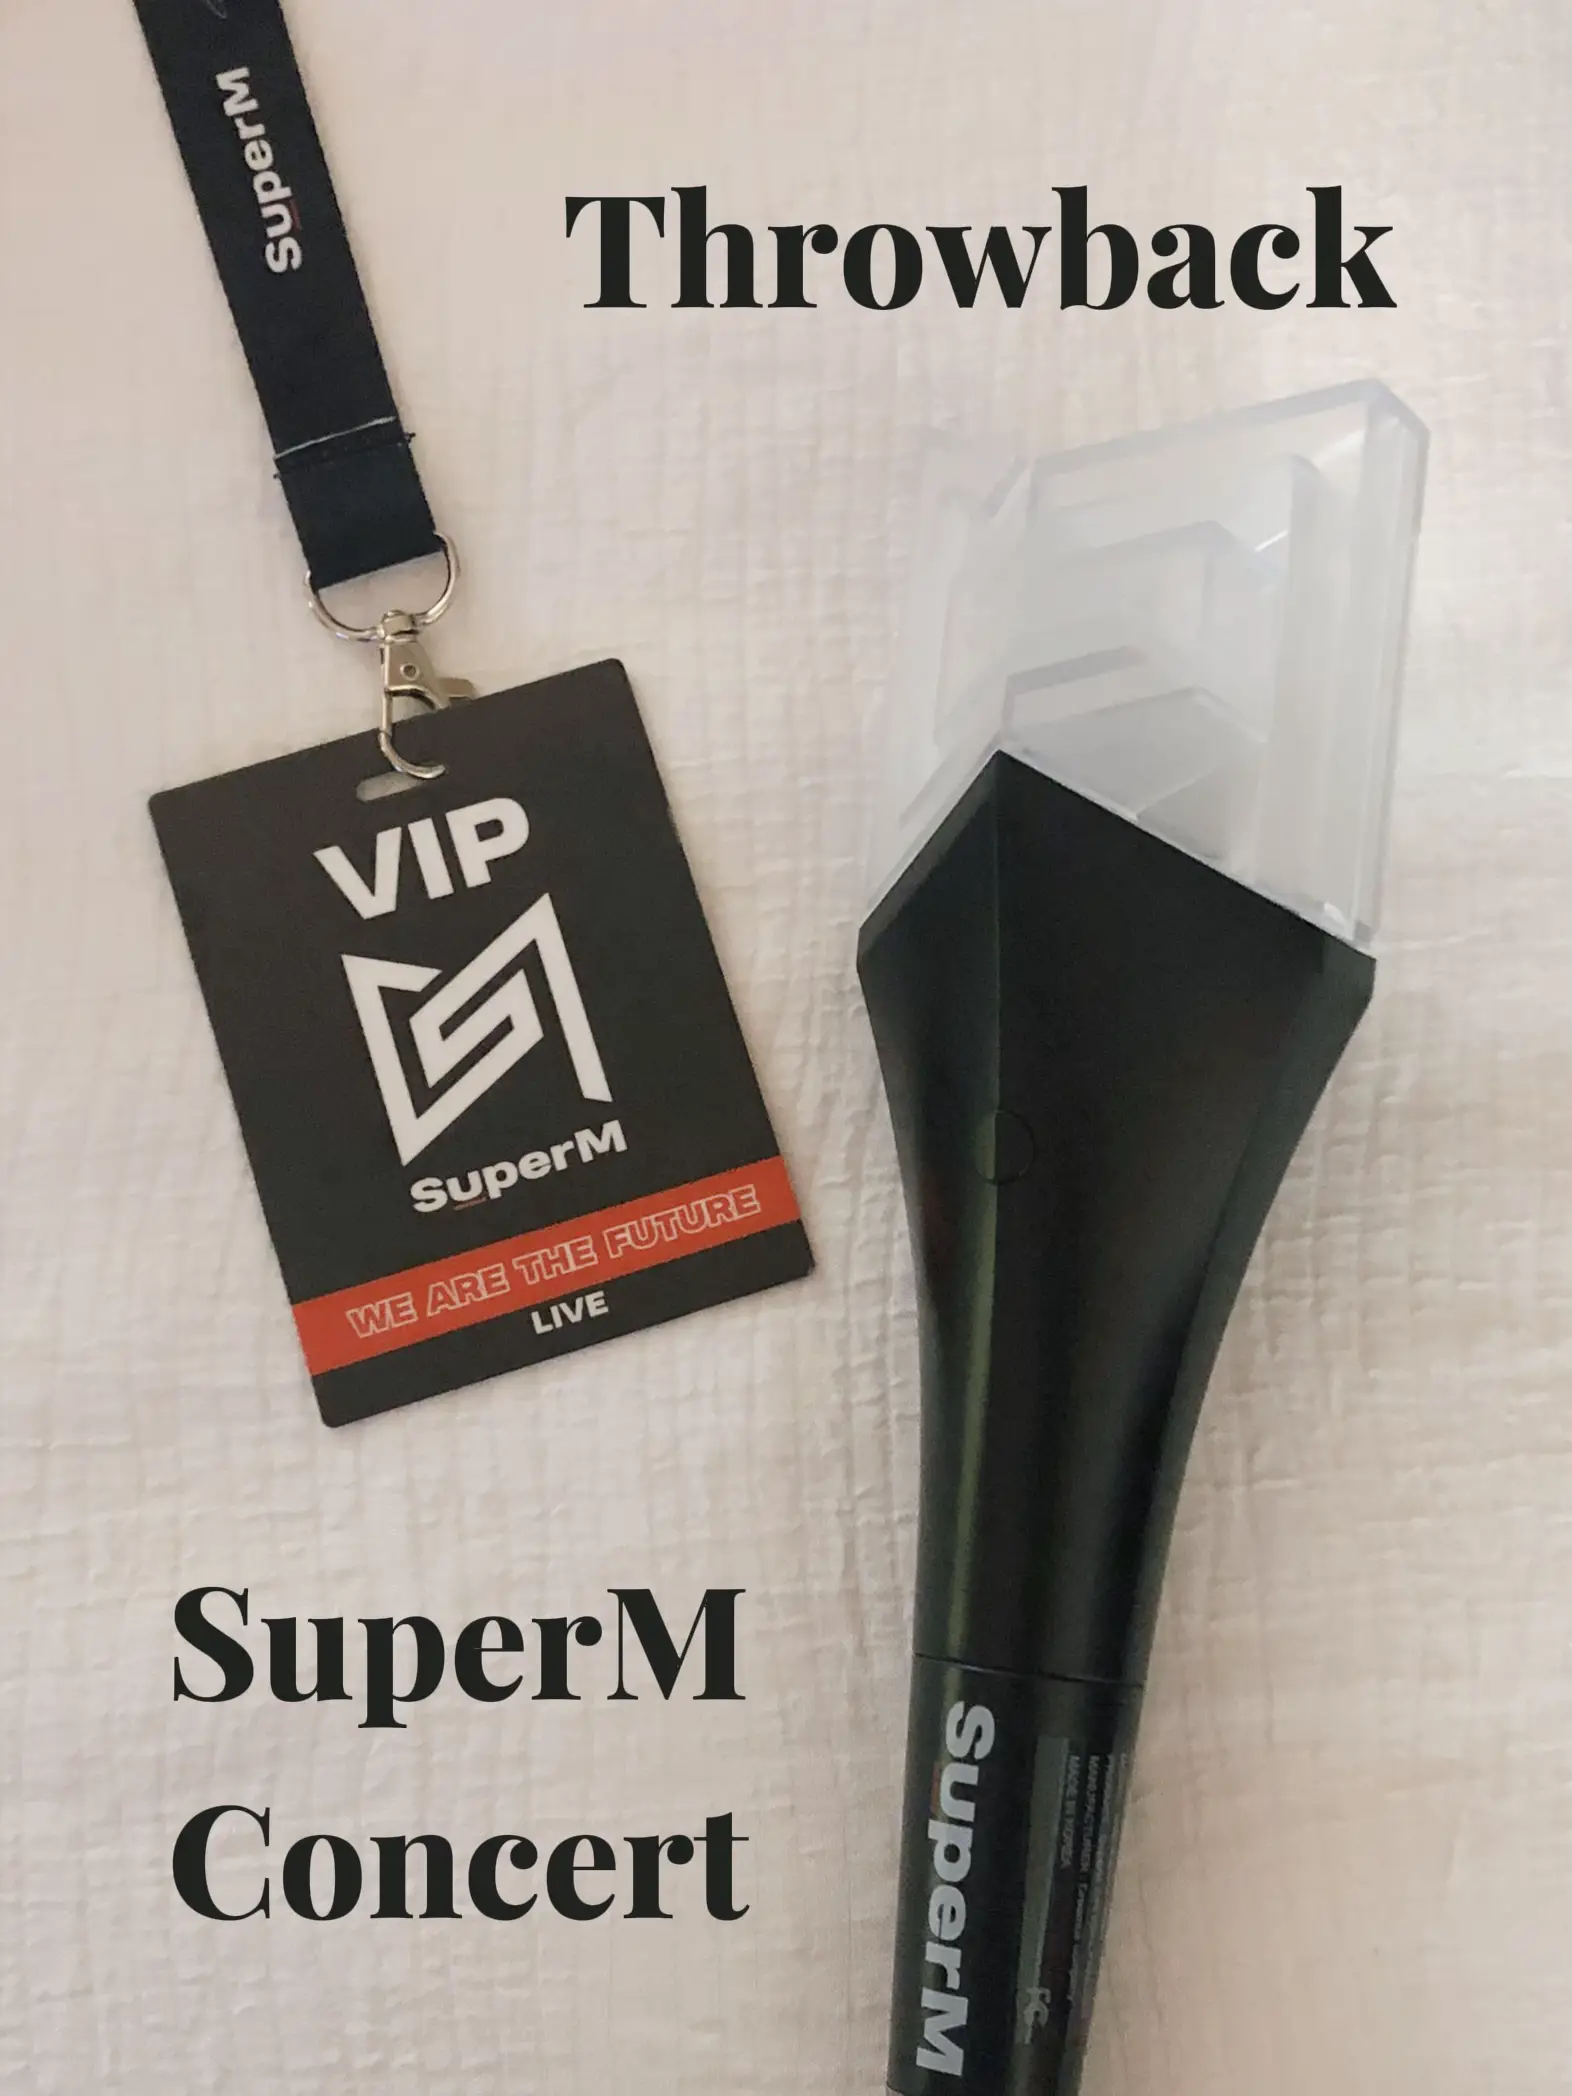  A black microphone with a white logo and the words "Super M" on it.